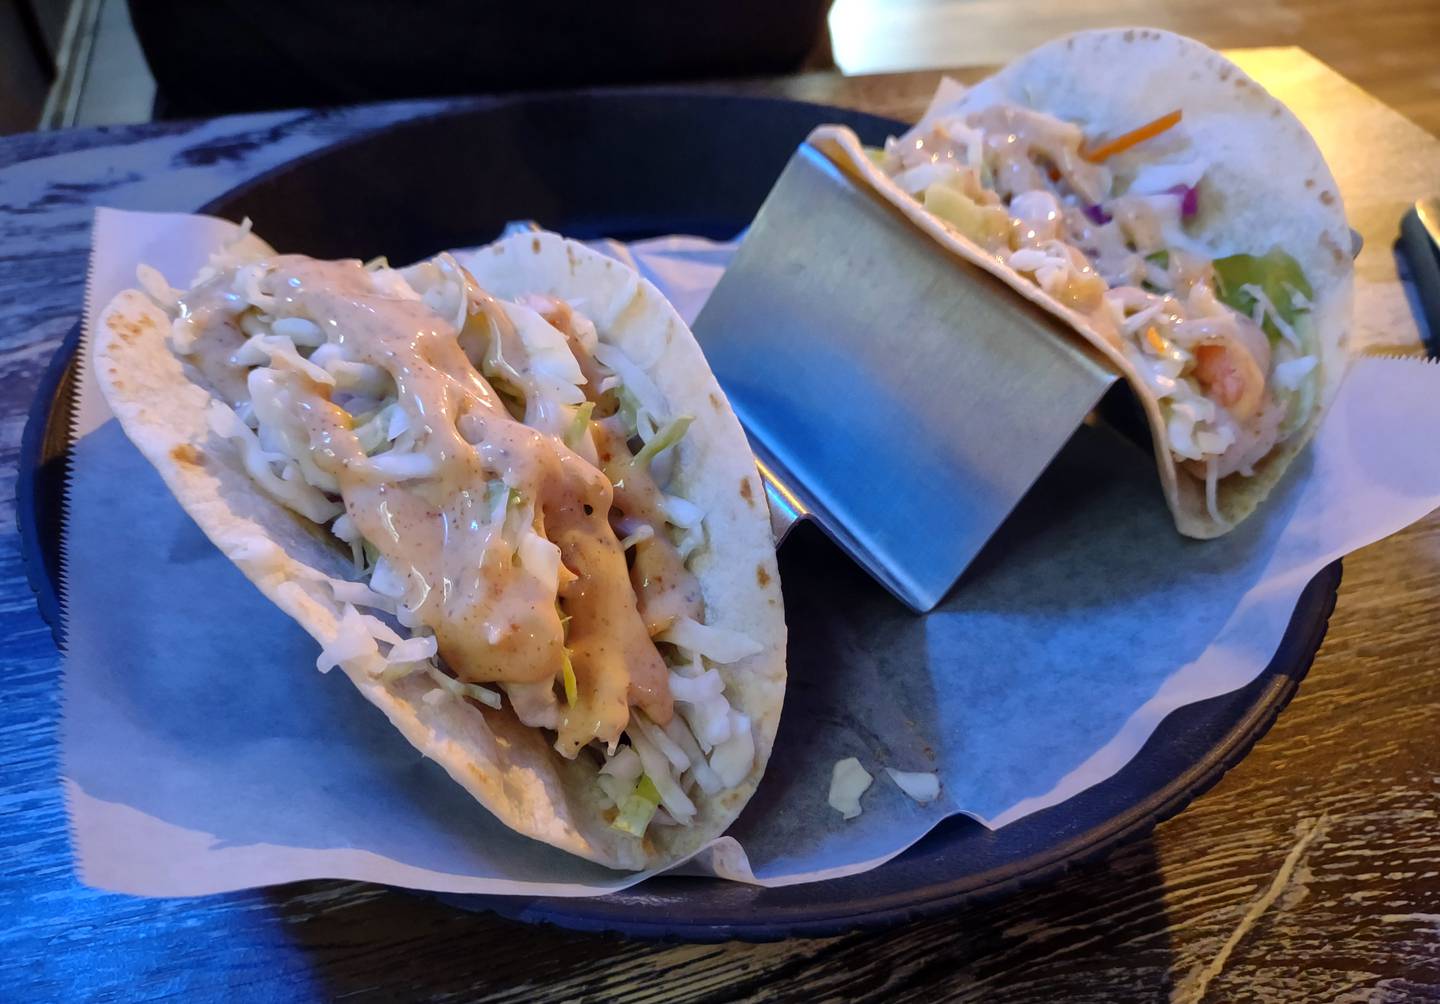 Two tacos are offered à la carte on the menu at Ziggy's Bar & Grill in downtown Marseille.  The fish taco is made with breaded Alaska pollock and a choice of ranch or Ziggy slaw.  The shrimp taco includes shrimp and ziggy salad.